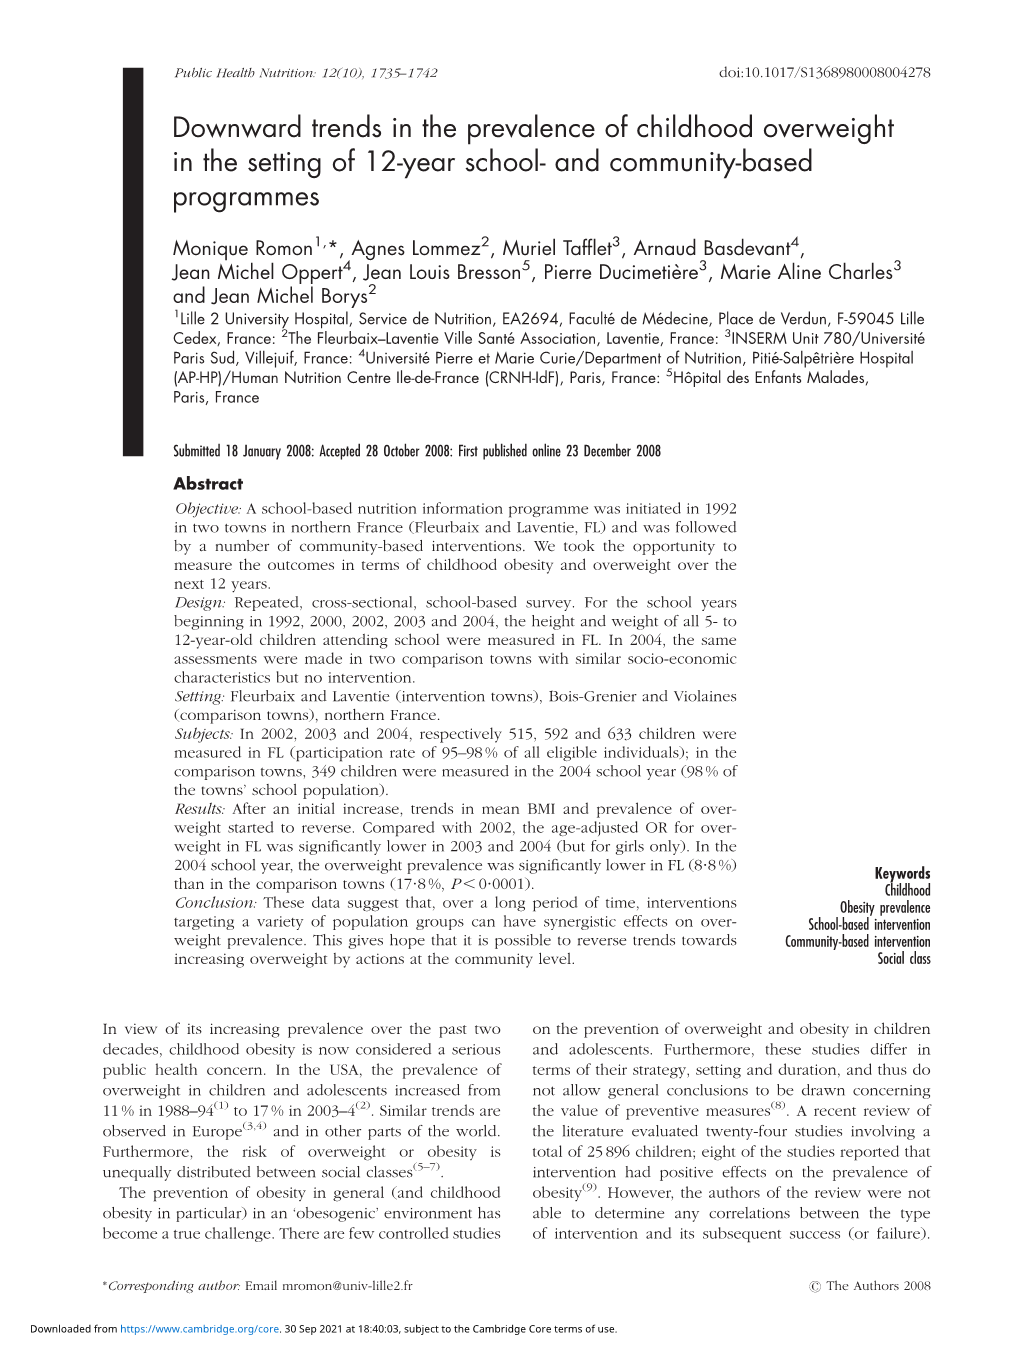 Downward Trends in the Prevalence of Childhood Overweight in the Setting of 12-Year School- and Community-Based Programmes